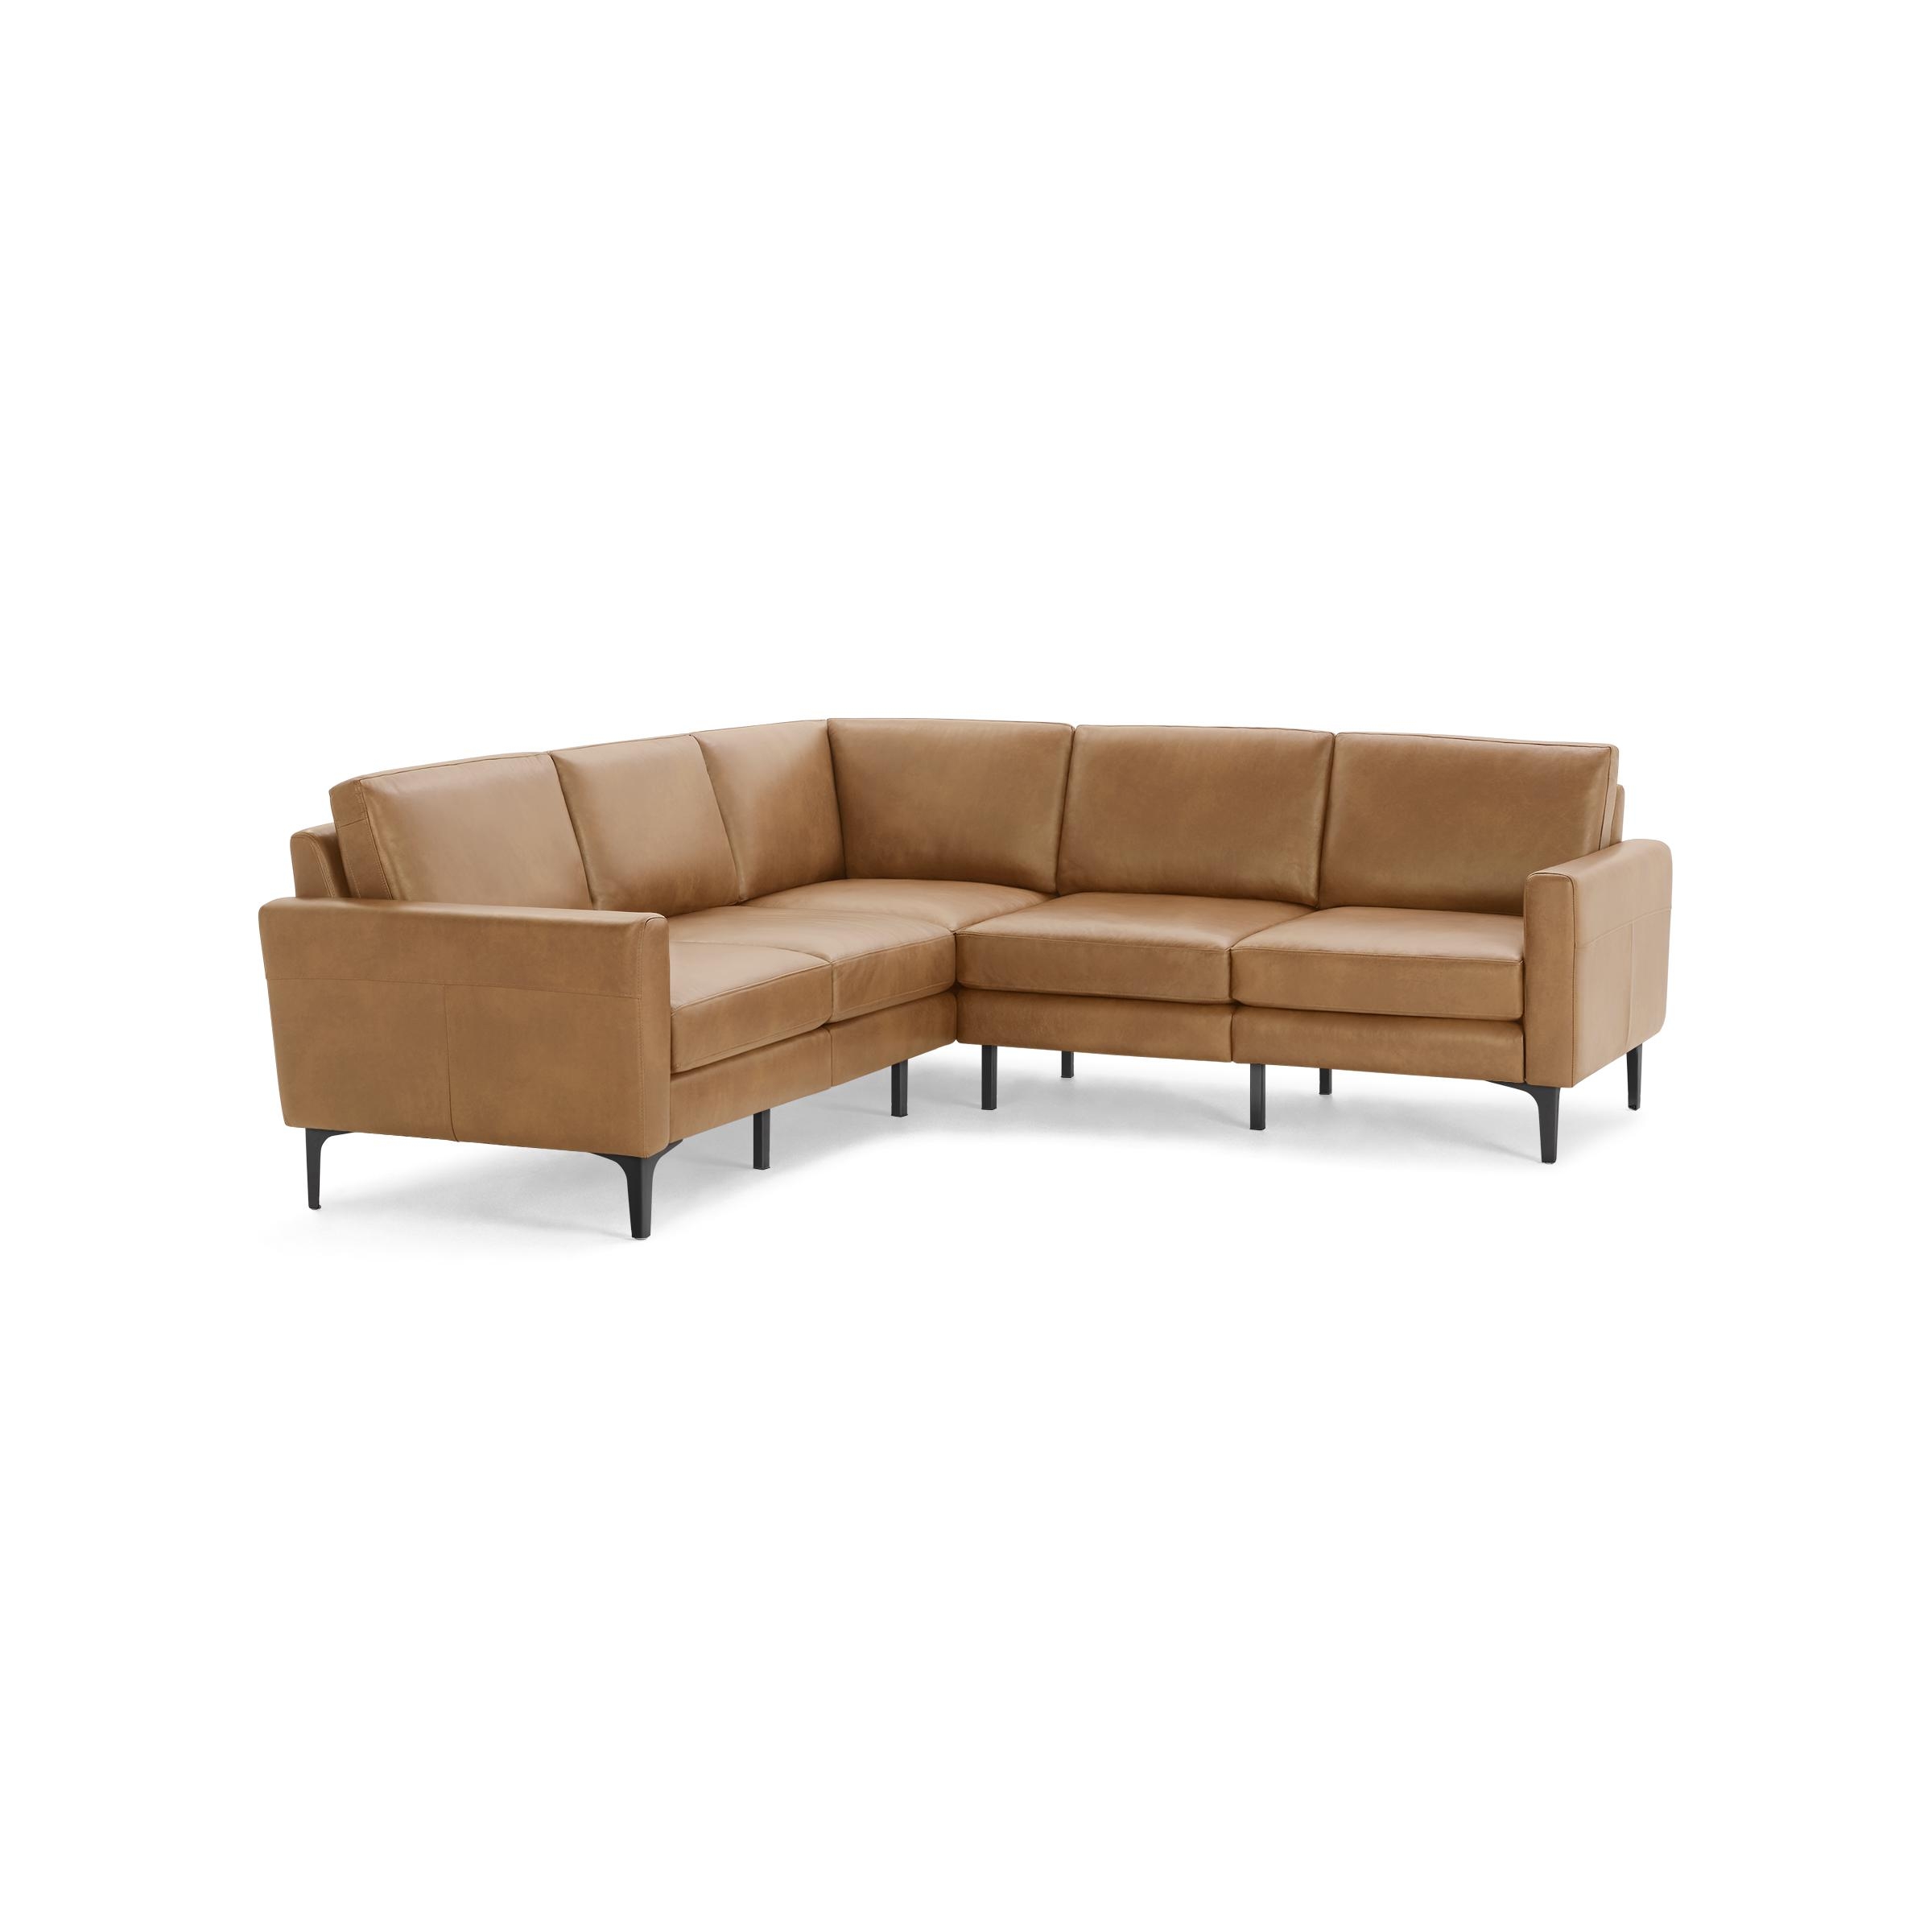 The Block Nomad Leather 5-Seat Corner Sectional in Camel - Image 1